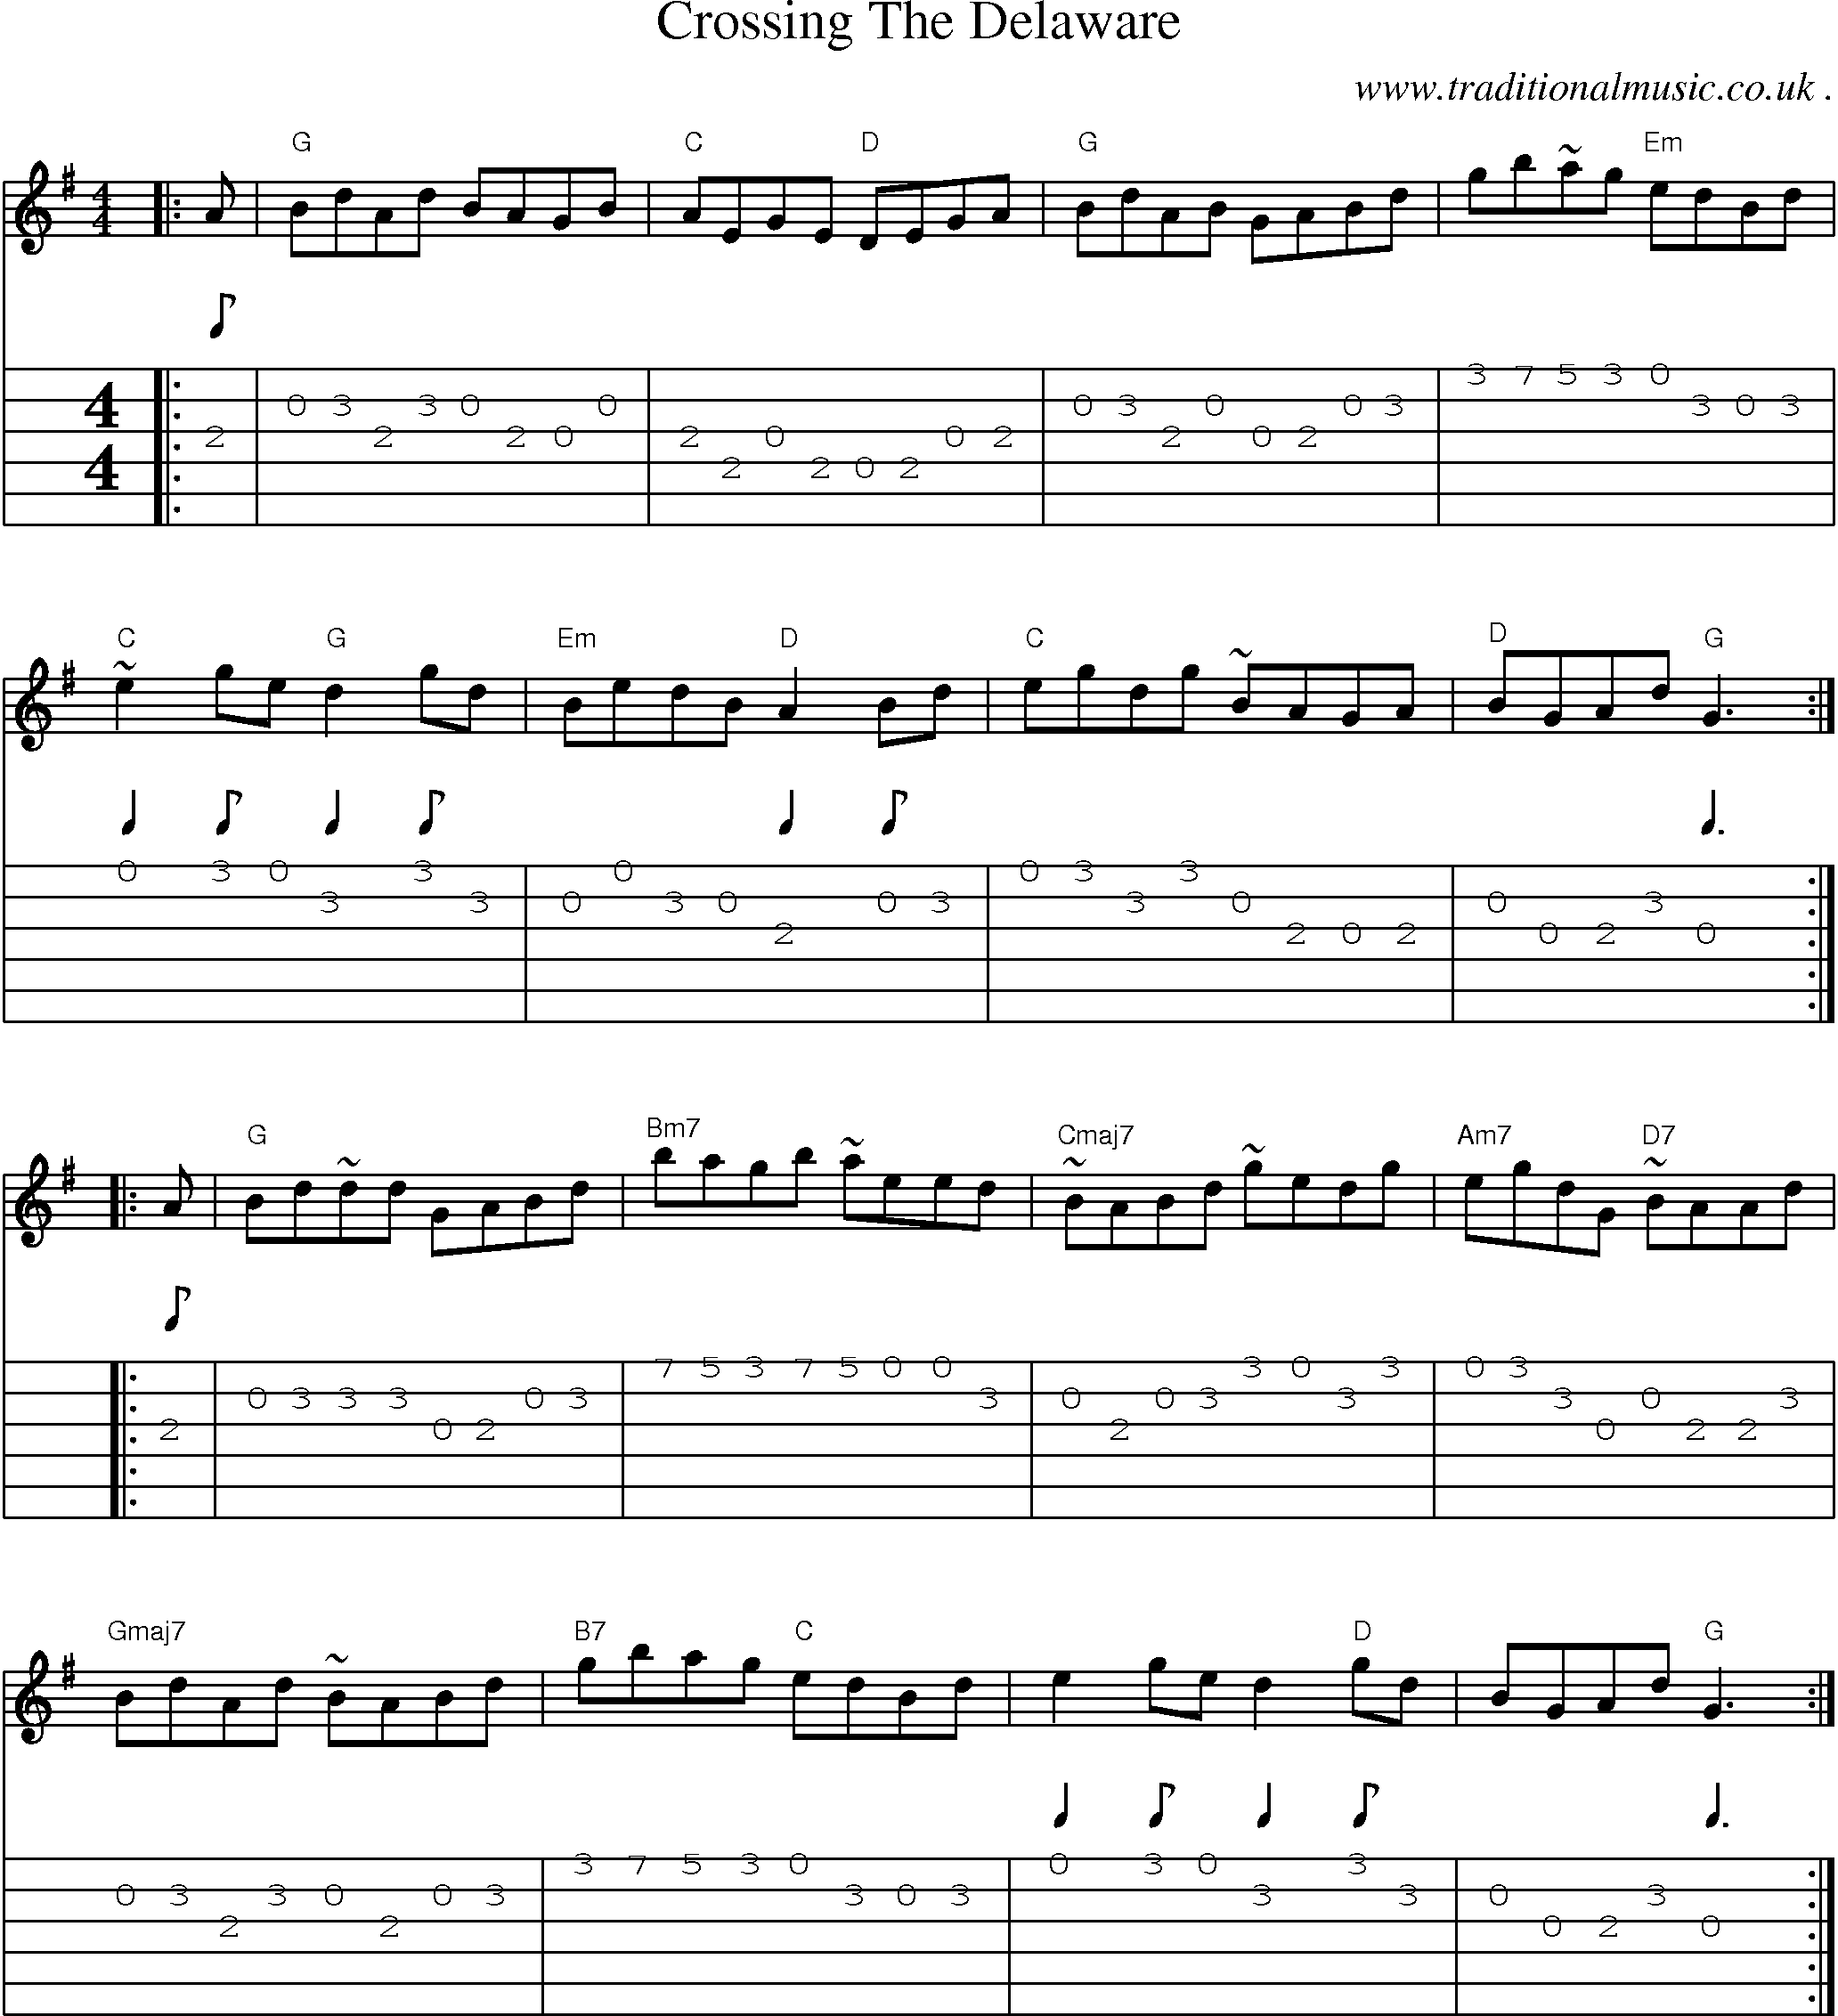 Music Score and Guitar Tabs for Crossing The Delaware